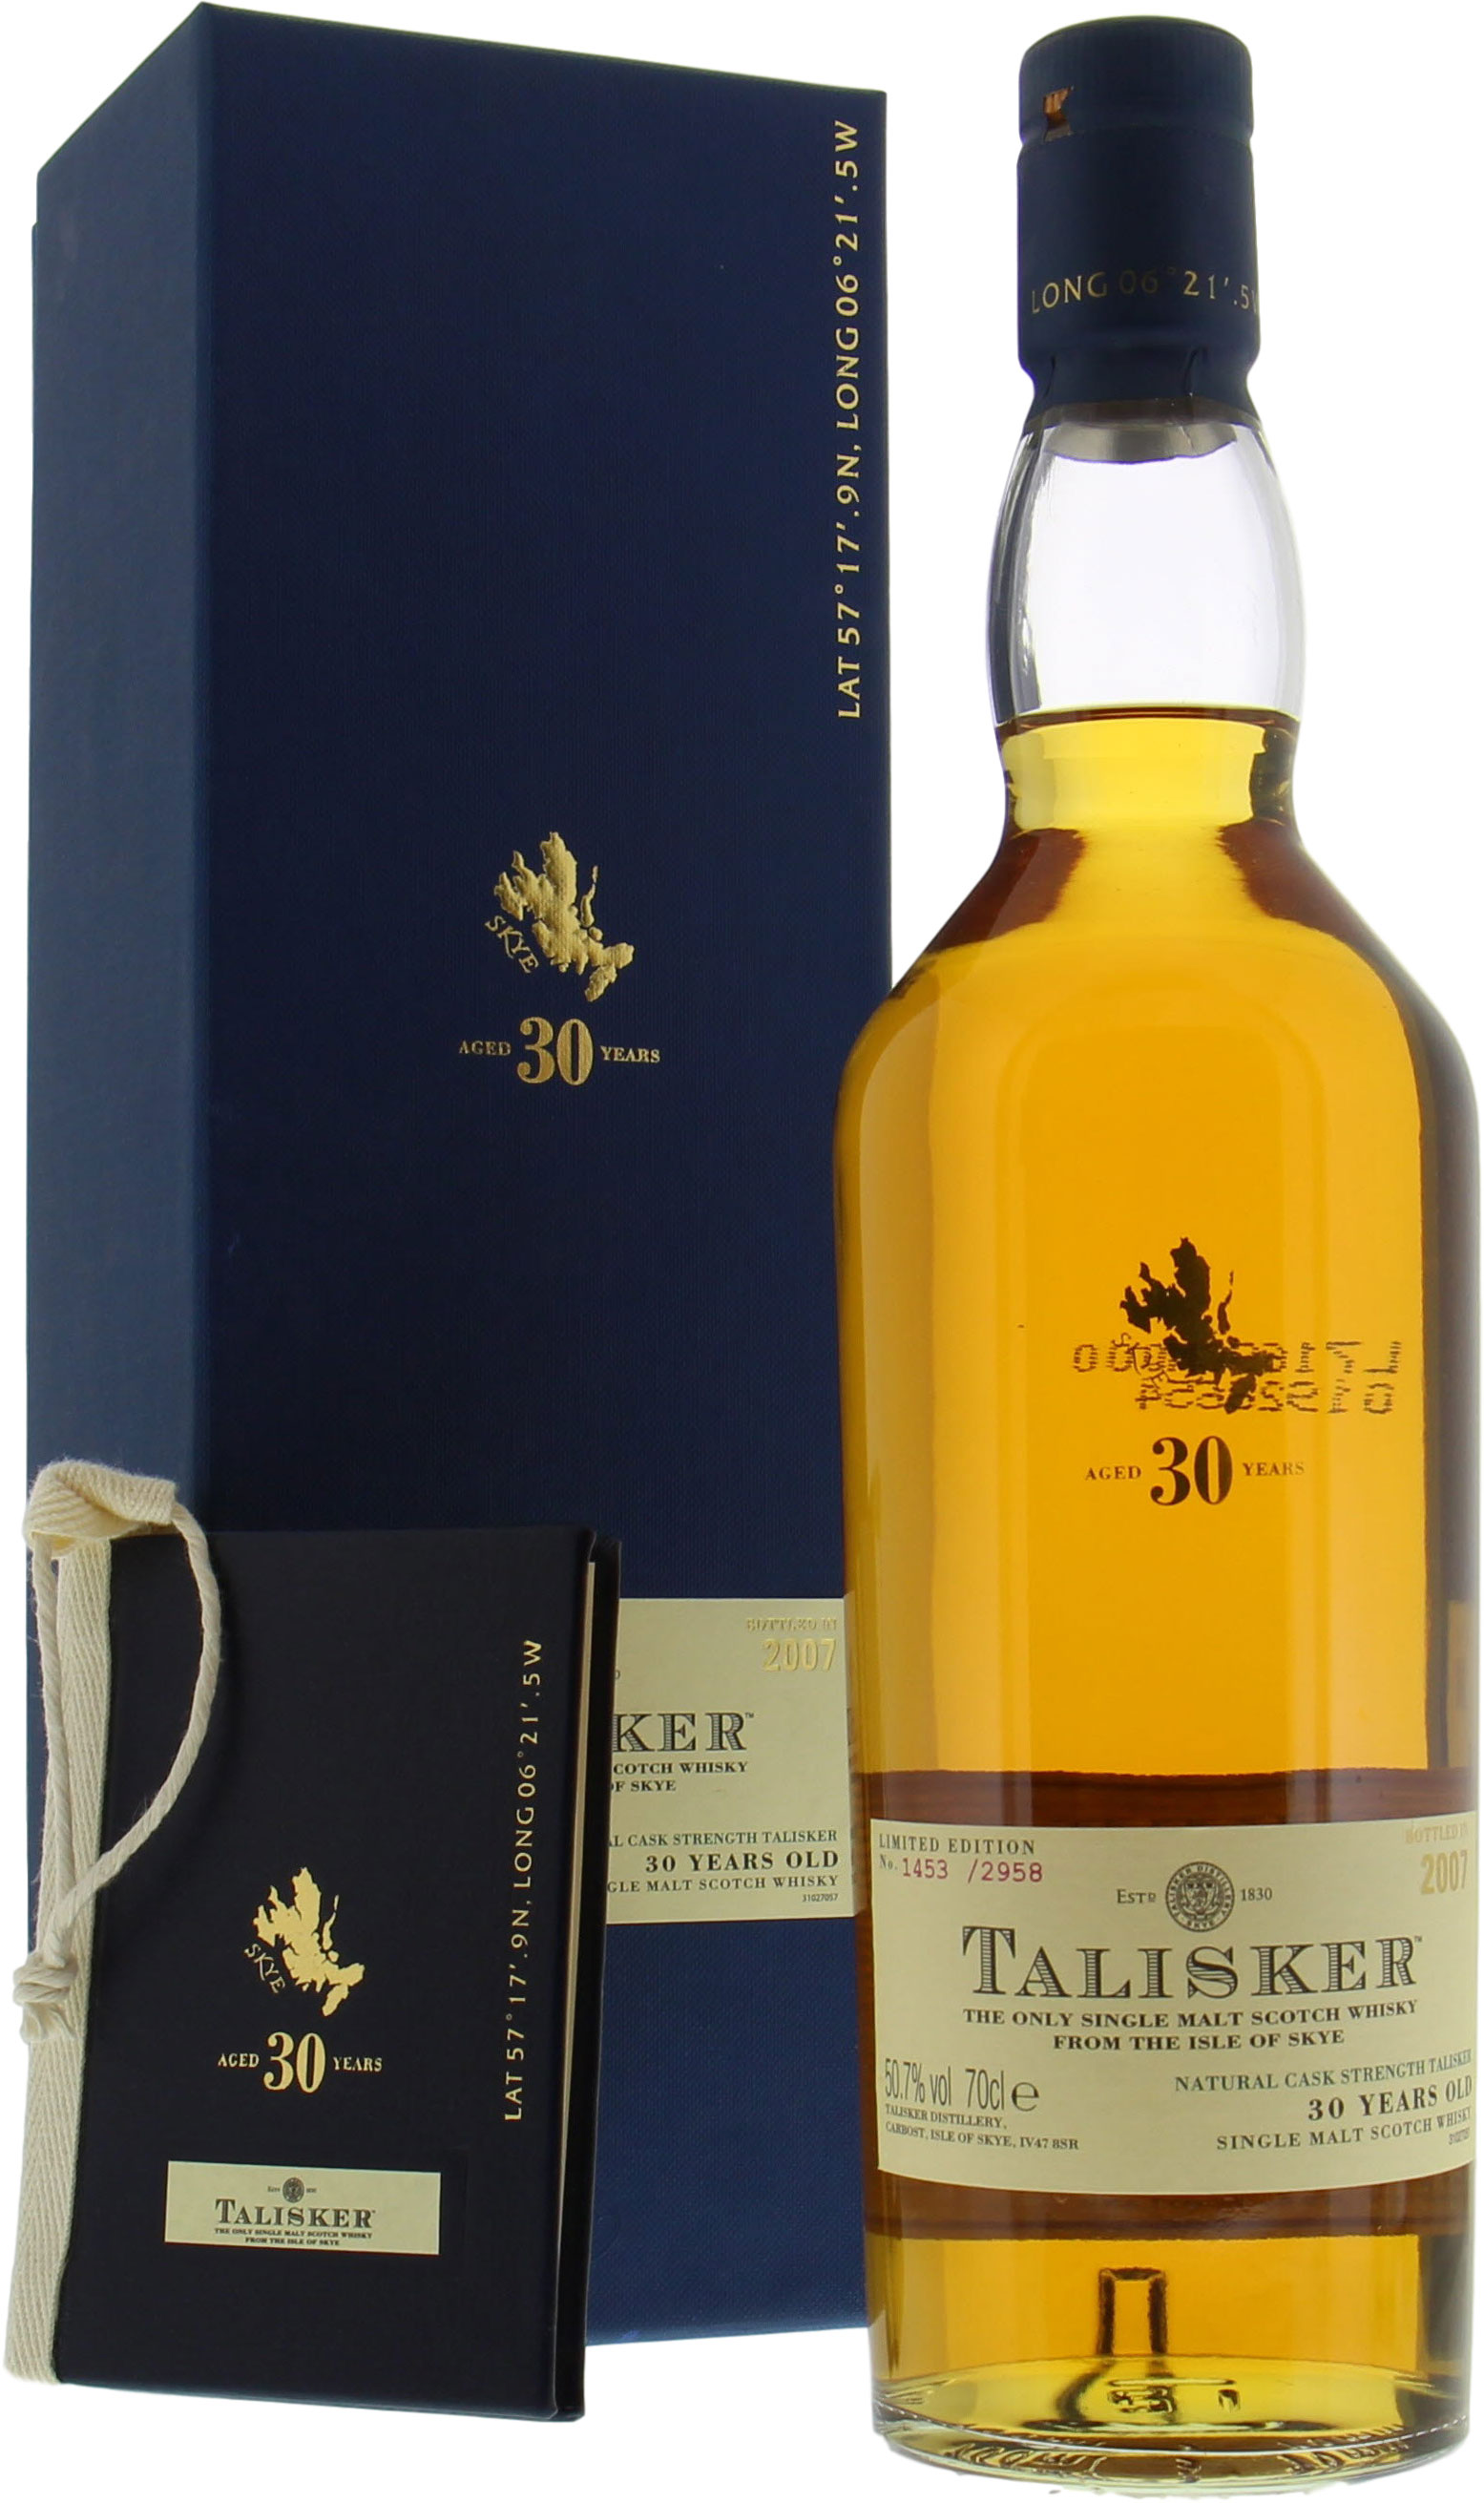 Talisker - 30 Years Old 2007 Release 50.7% NV In Original Container 10001